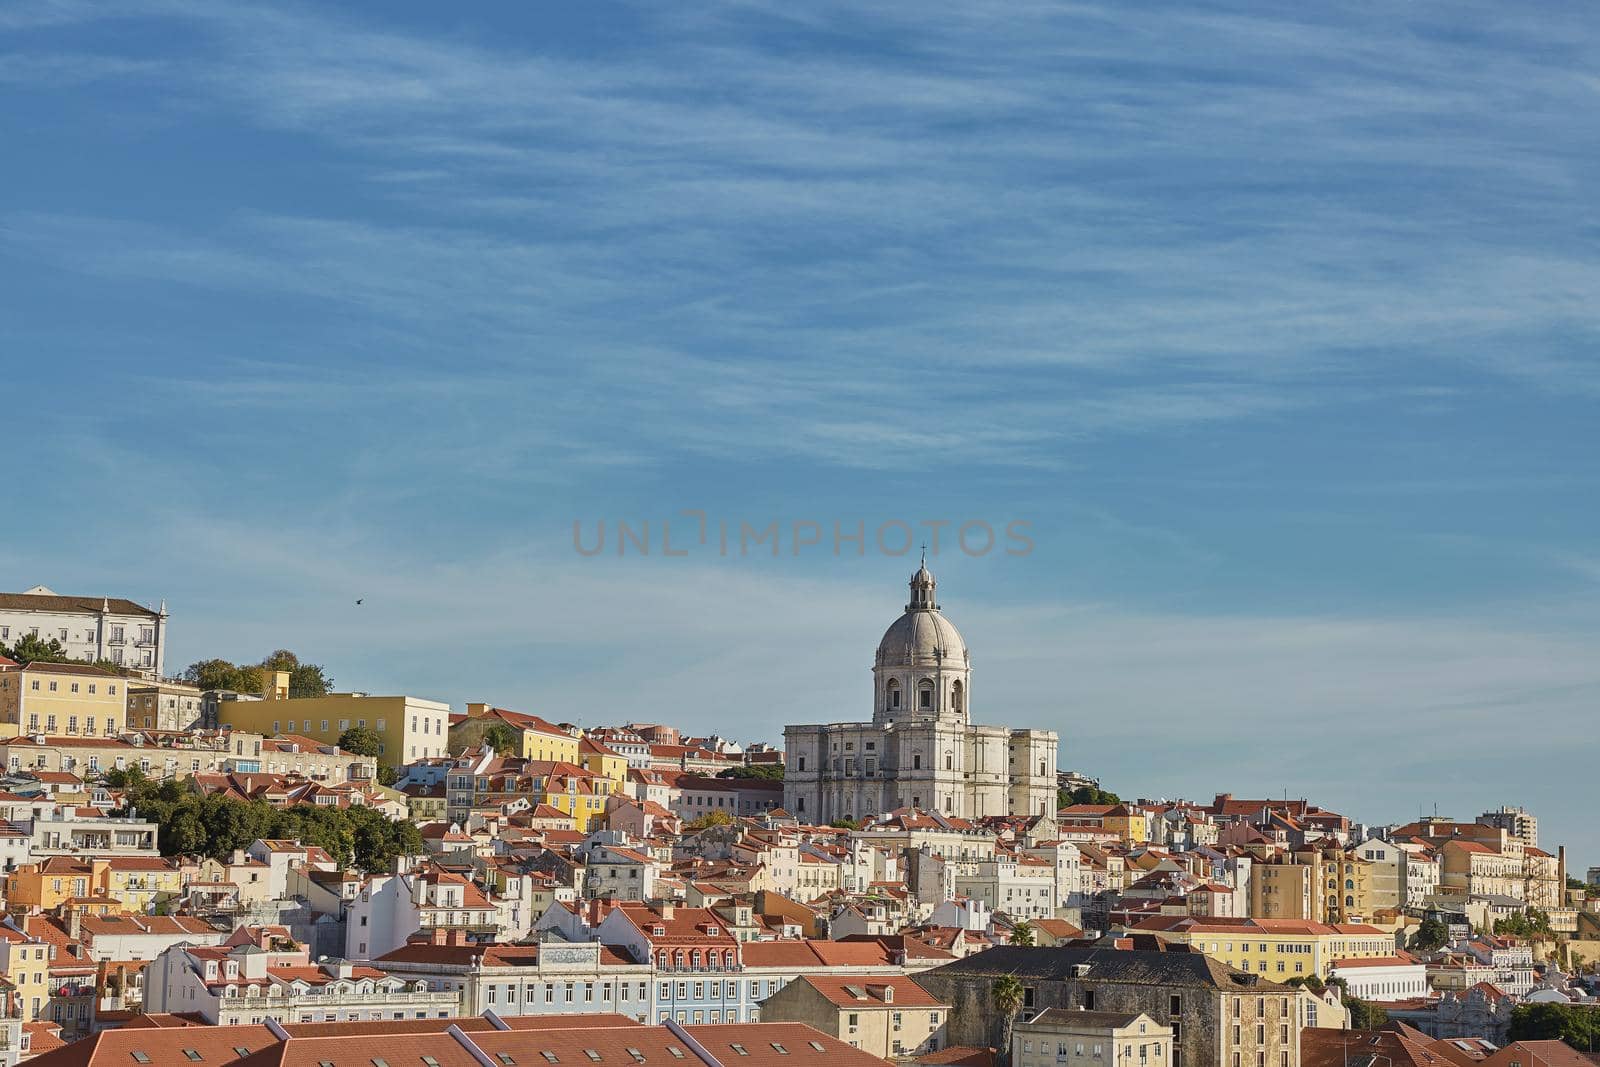 View of national pantheon and cityline of Alfama in Lisbon, Portugal